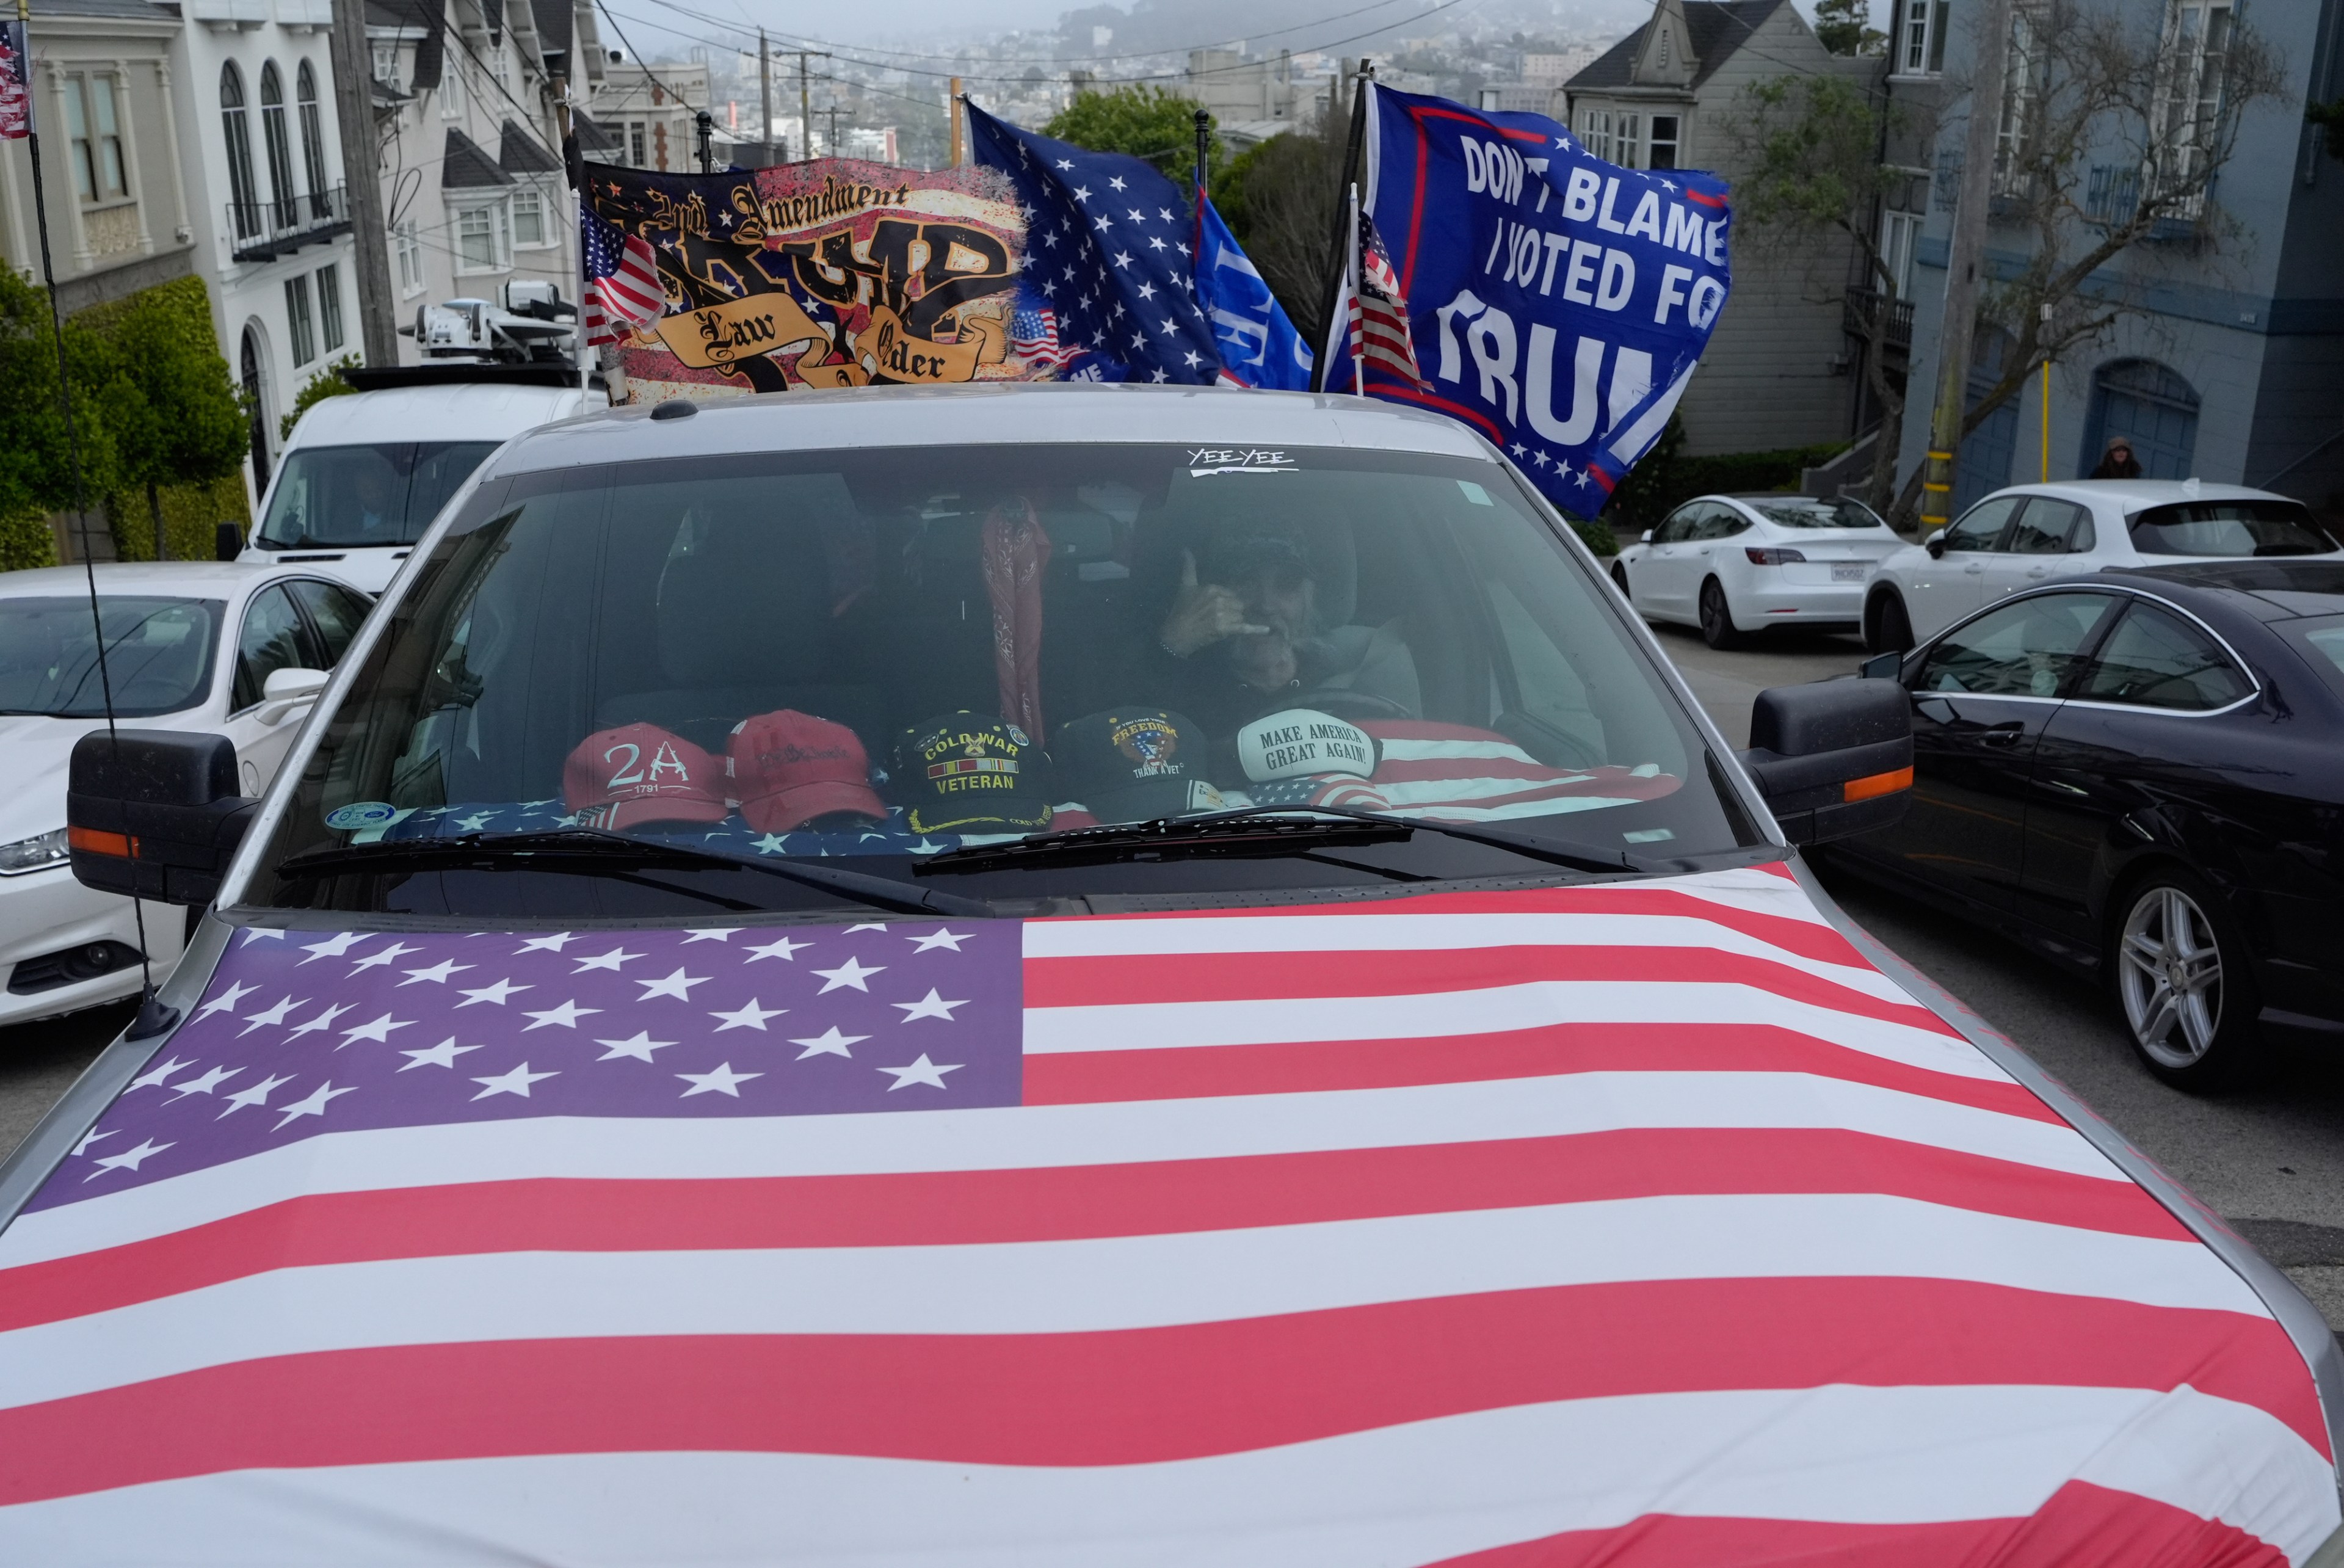 A truck draped in an American flag has its dashboard adorned with multiple hats, and pro-Trump flags are attached. It is parked on a street with other cars.